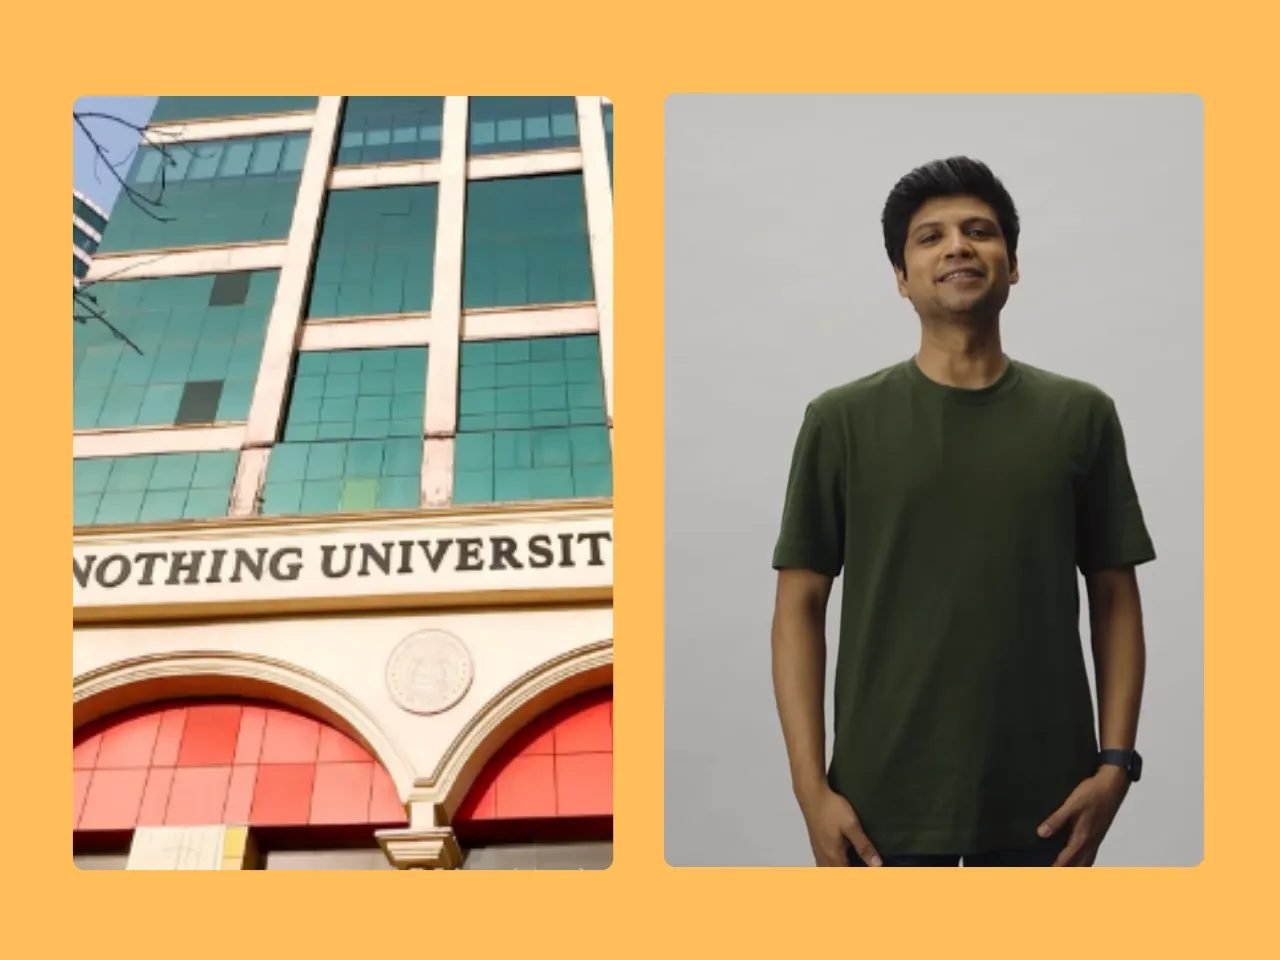 Case Study: How 5Star made 2 lakh+ users sign up its 'Nothing University' by leveraging the power of social media